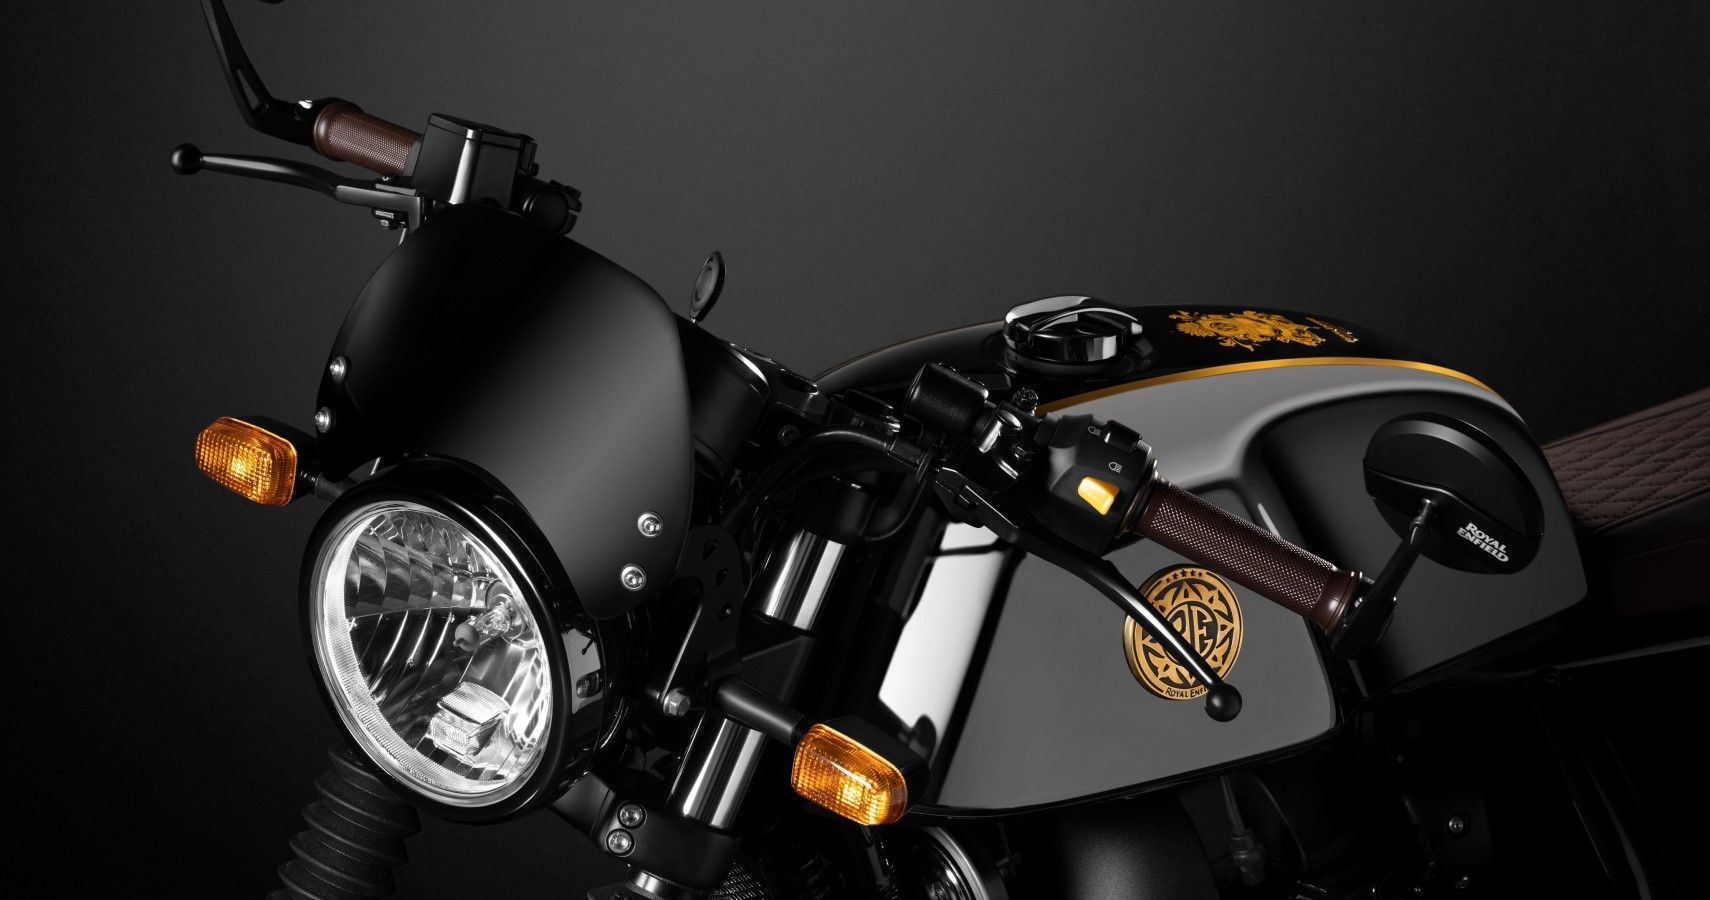 2022 Royal Enfield 120th Year Anniversary Edition 650 twins front fascia close-up view